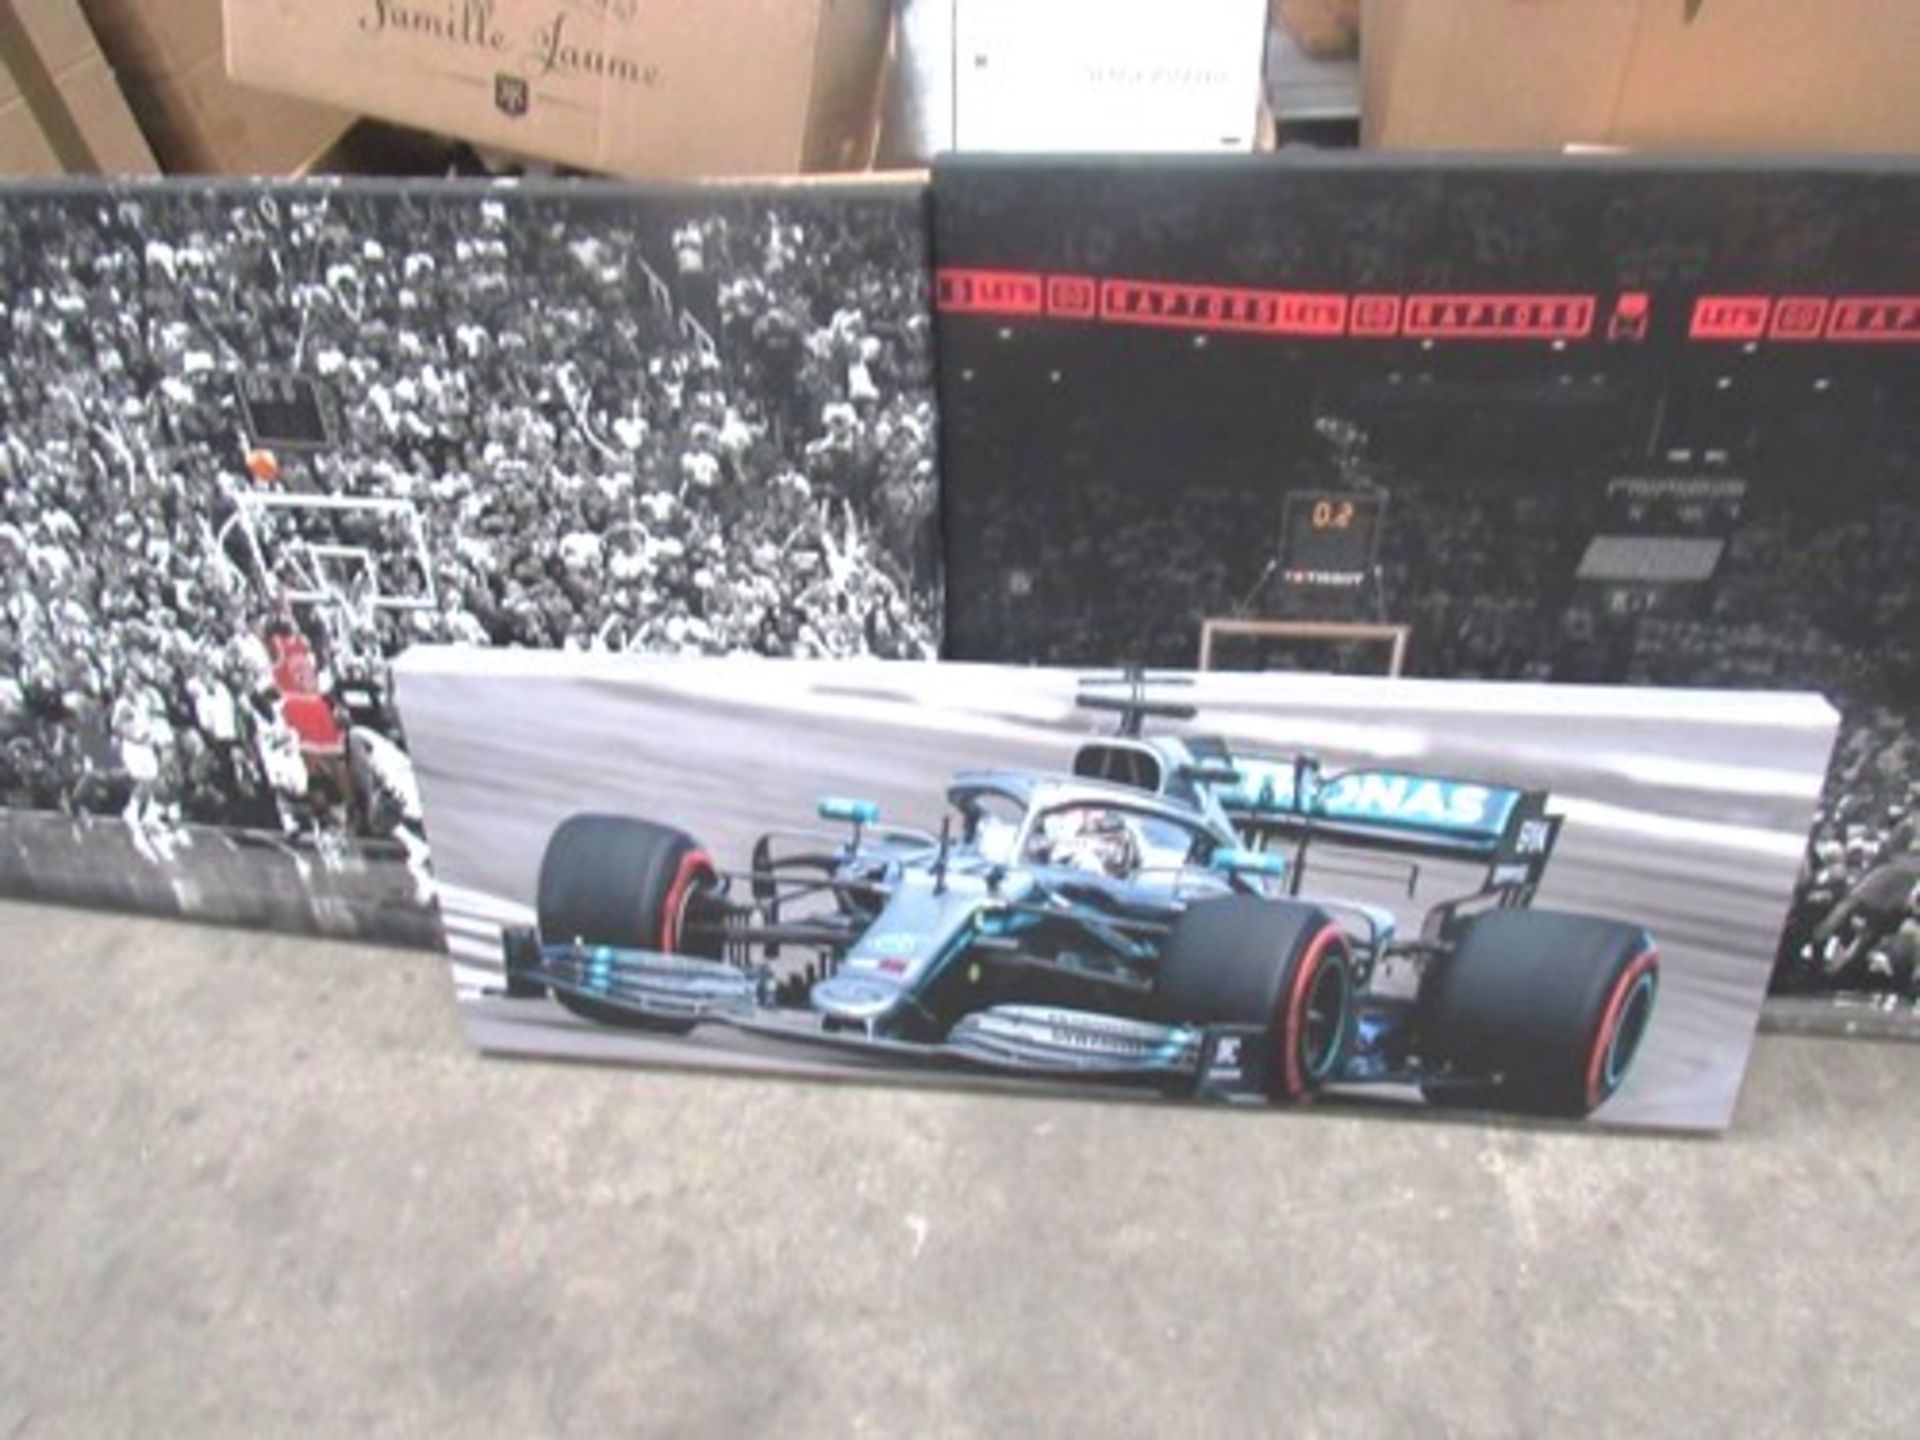 3 x Canvas Art with sporting themes, 2 x basketball and 1 x motor racing - New (cfloor)